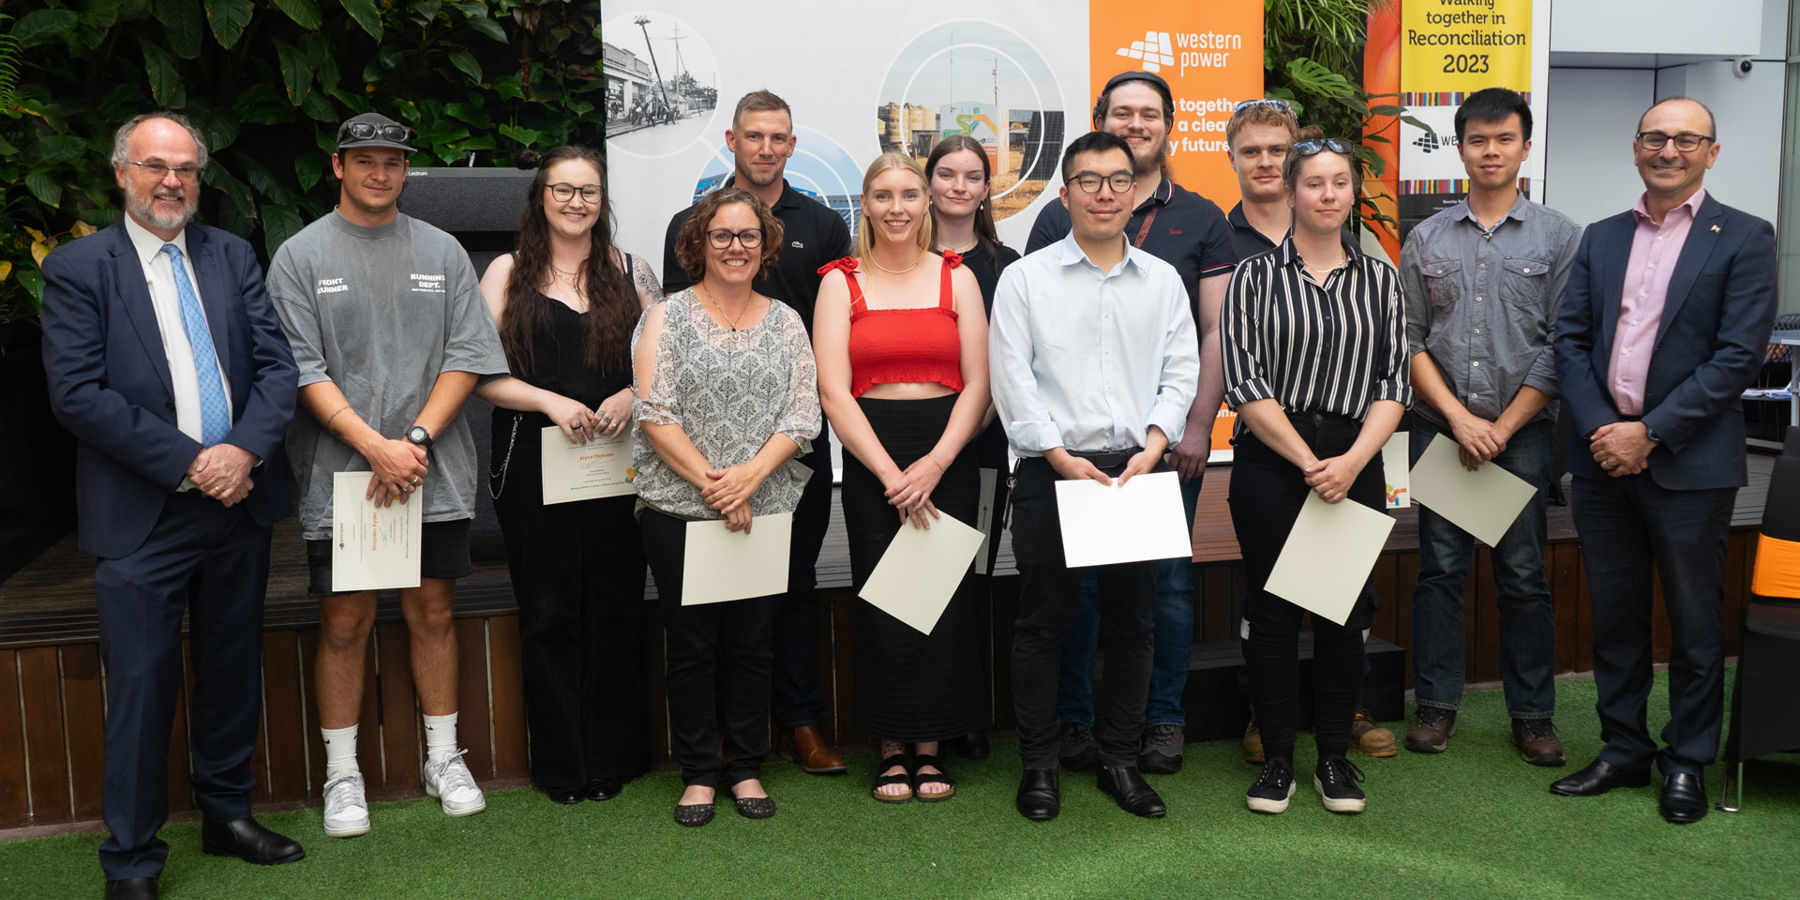 Business traineeship graduates and apprentices stood in a row alongside the Hon. Bill Johnston and Western Power CEO, Sam Barbaro